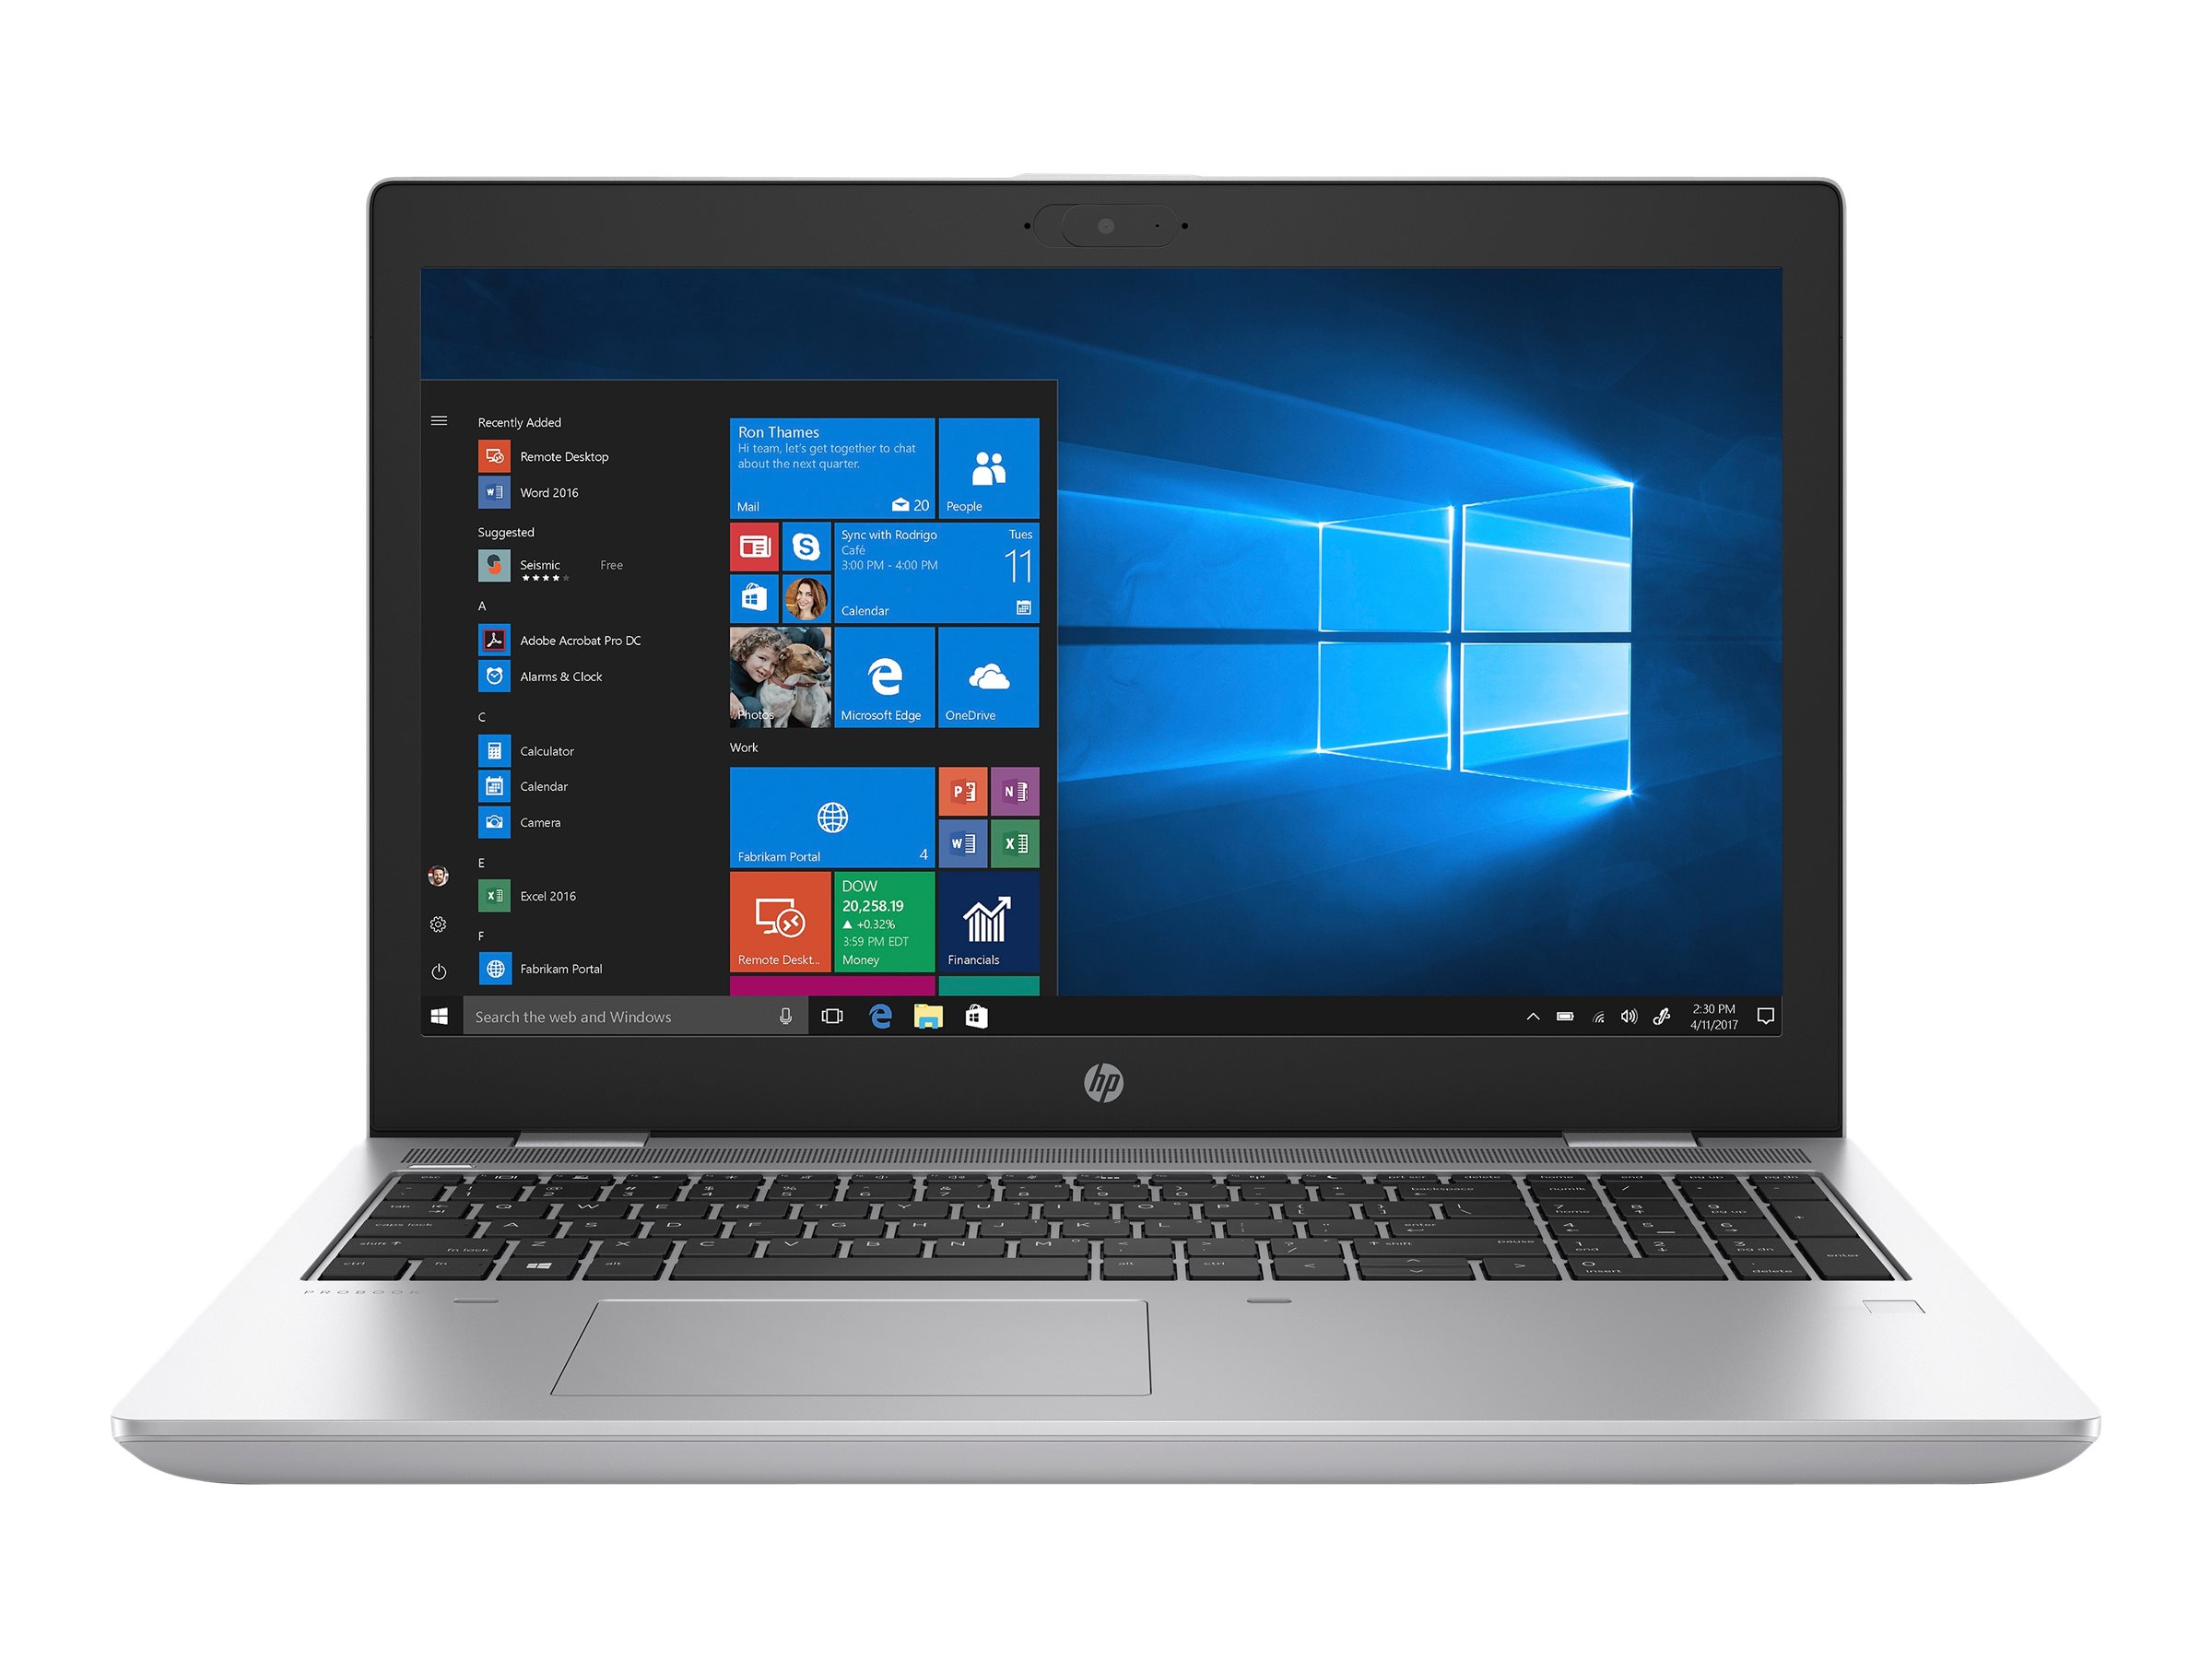 HP ProBook 635 Aero G7 Review : A well-rounded business notebook